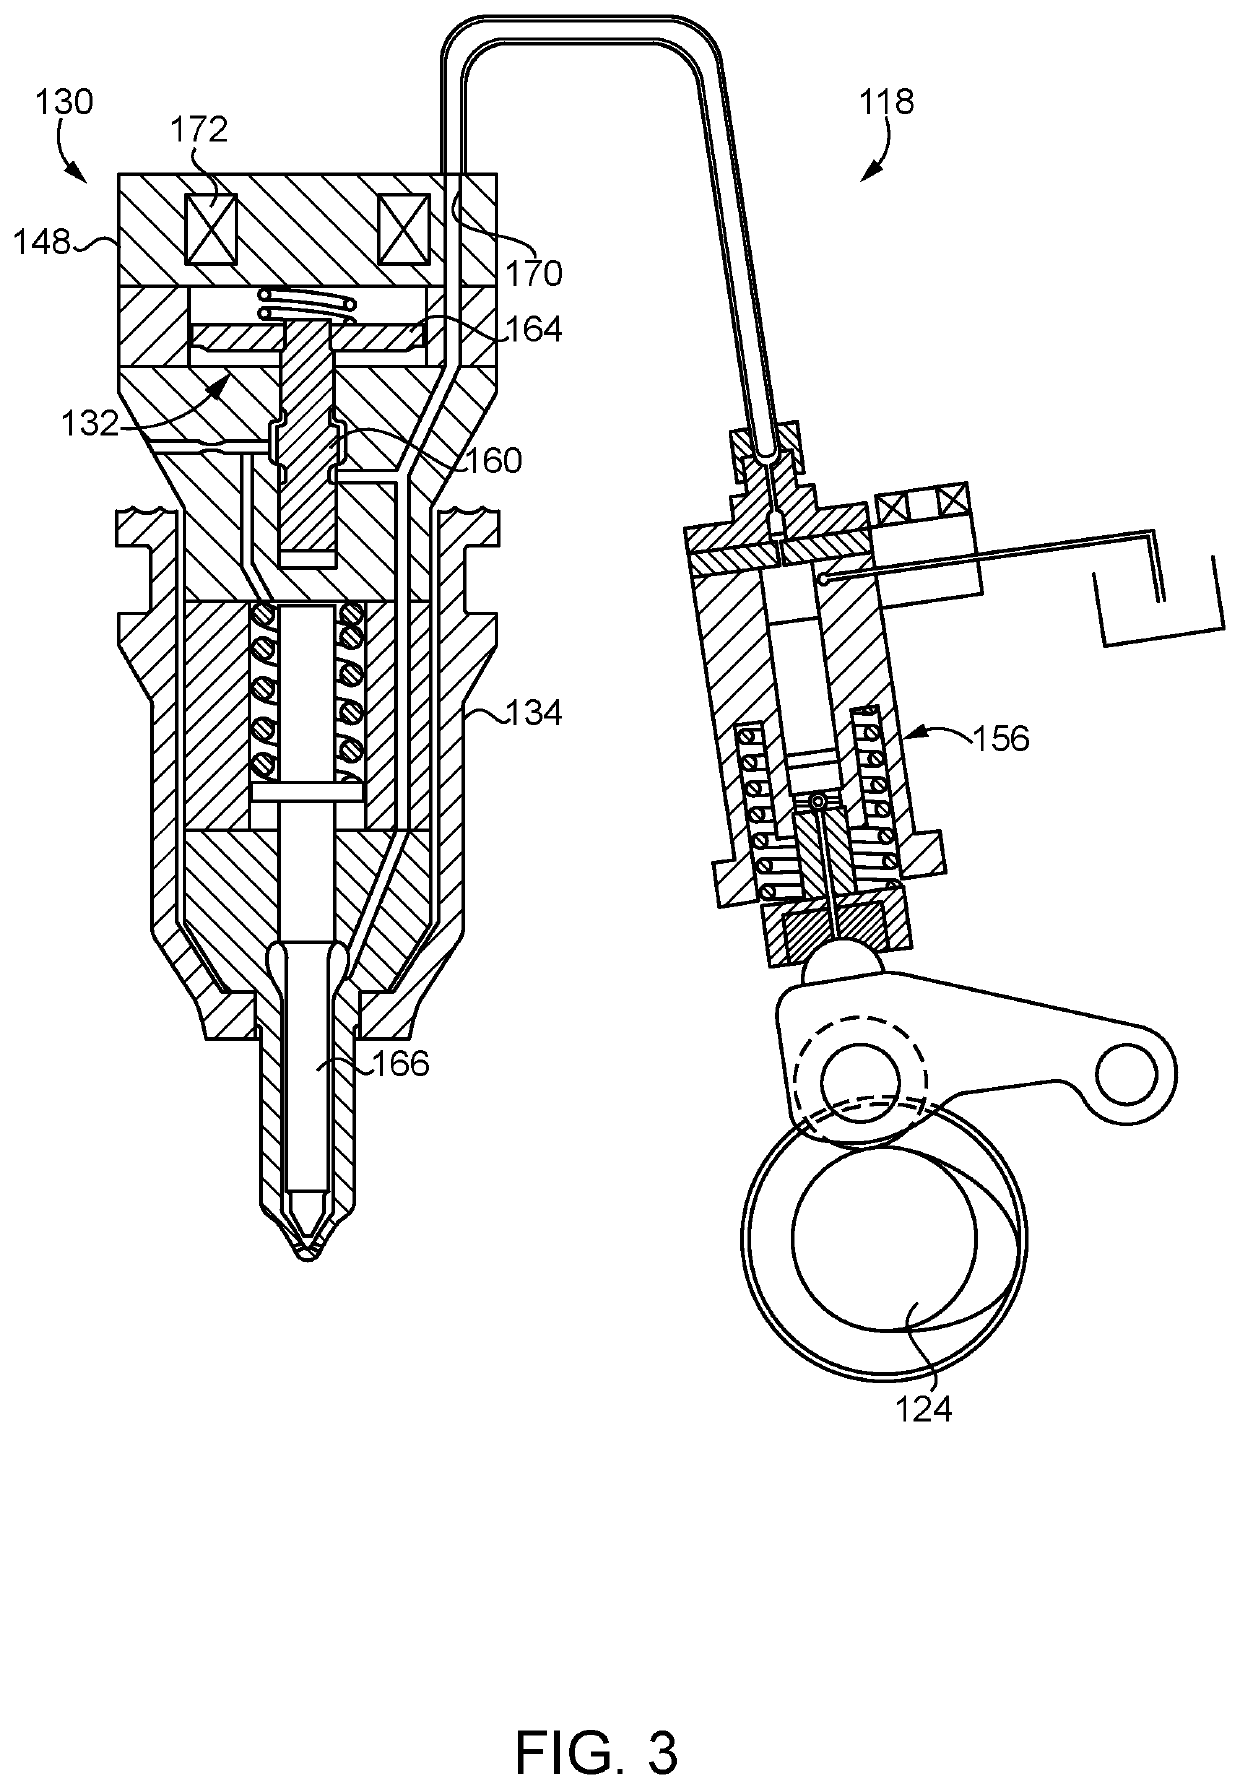 Fuel injector having residually stressed solenoid housing for improved pressure capapility